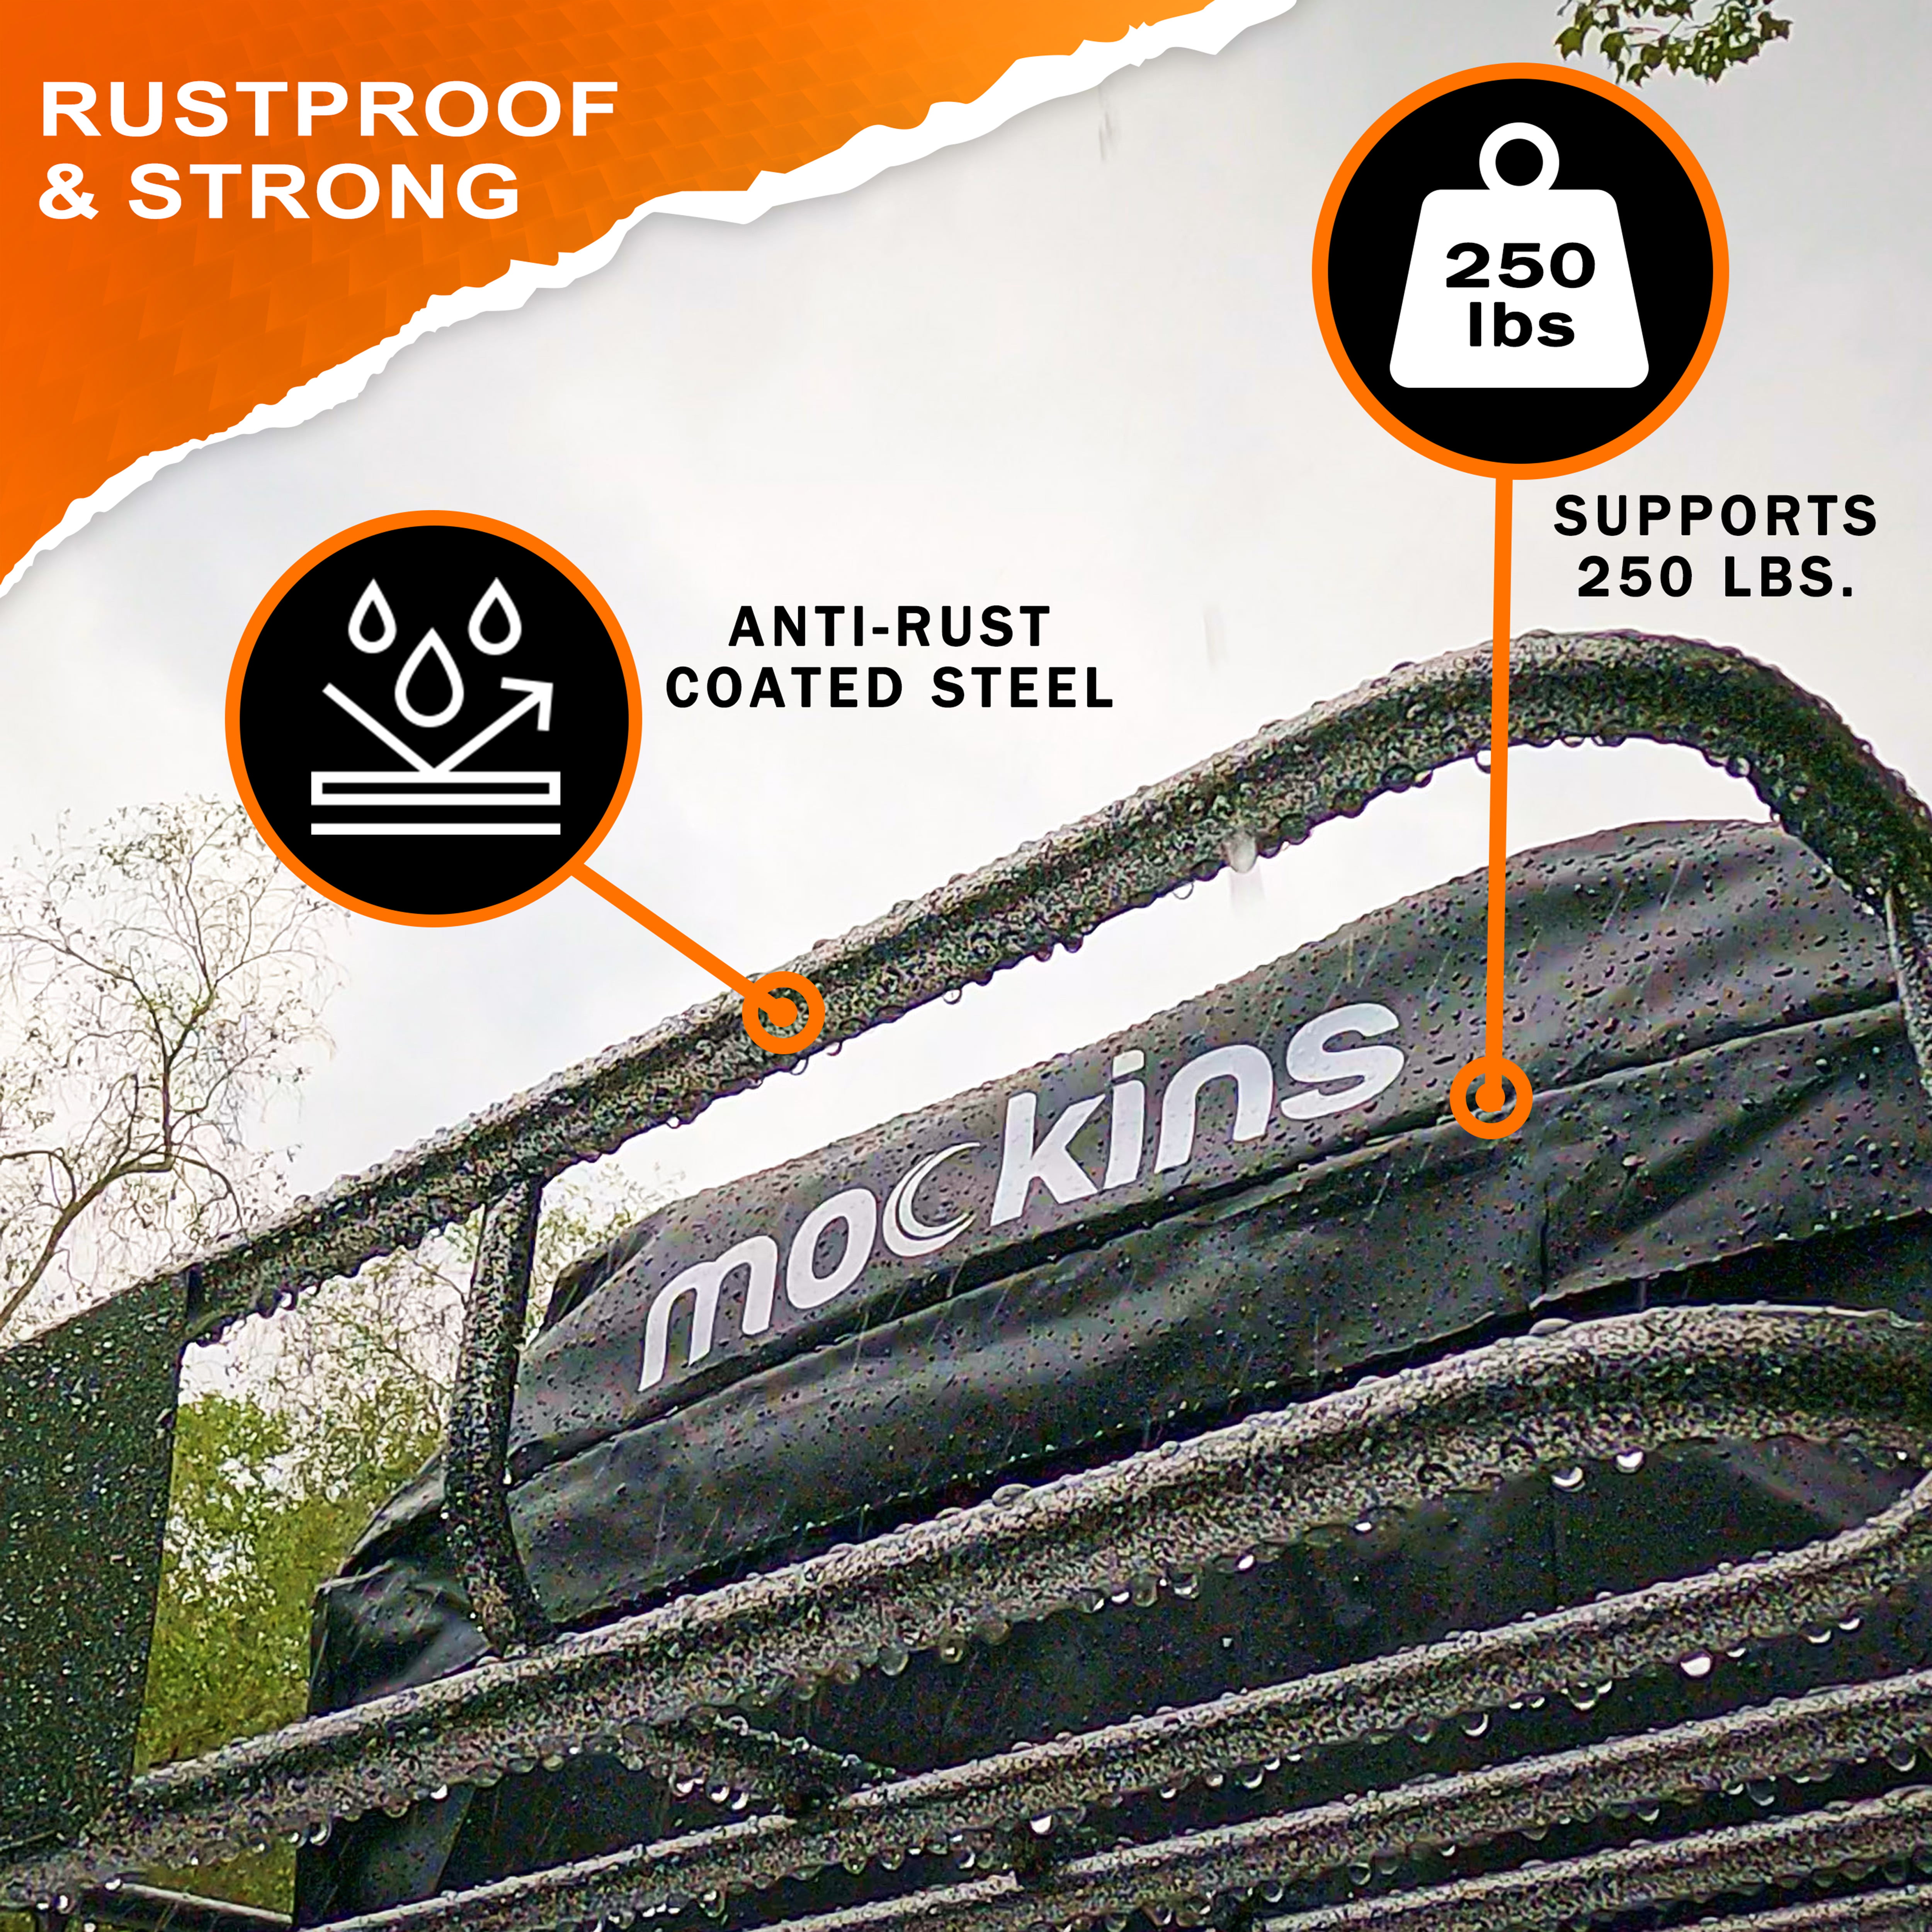 Mockins 250 lb. Roof Rack Basket with 16 CF Roof Bag - Roof Rack Cargo  Basket Adjusts from 43-64 in. L x 39 in. W x 6 in. H MA-34 - The Home Depot